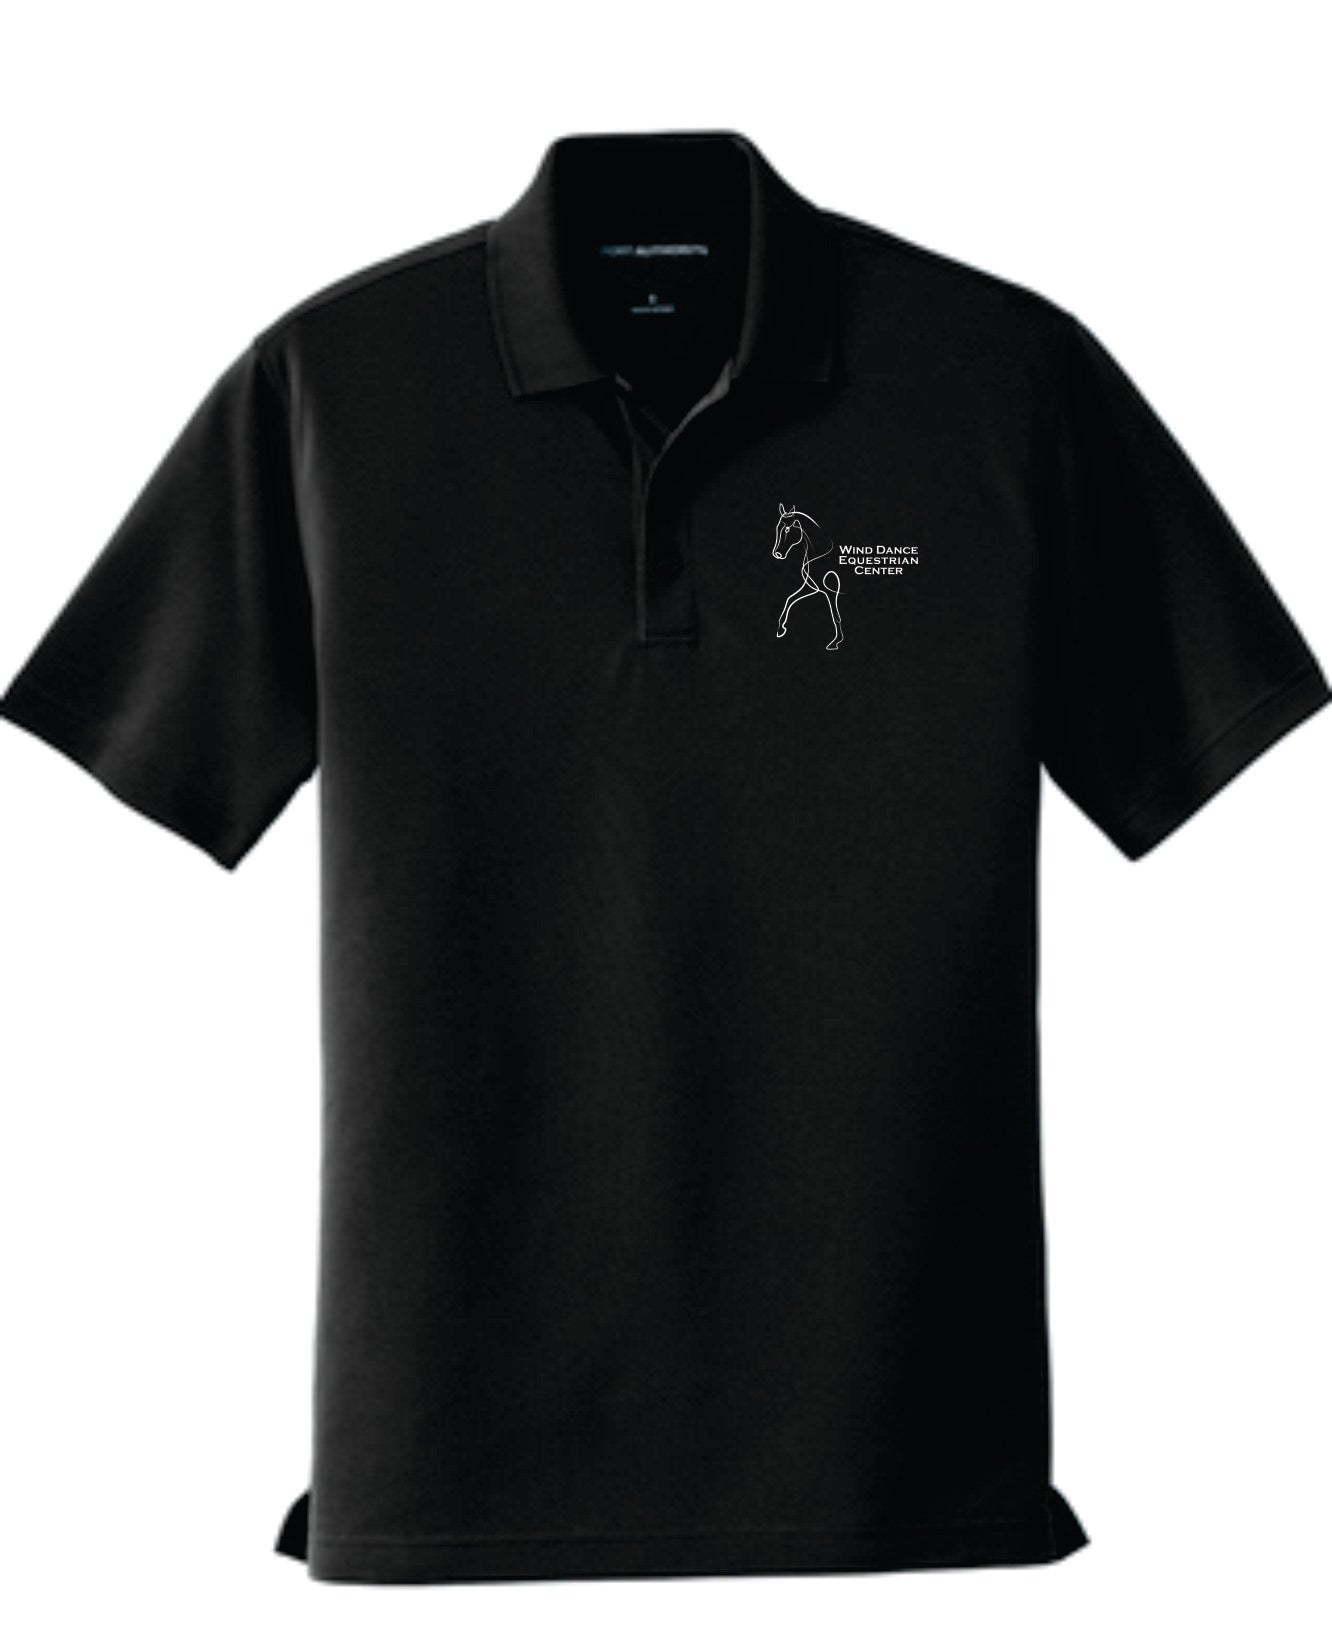 Wind Dance Equestrian Center Adult and Youth Embroidered Polos